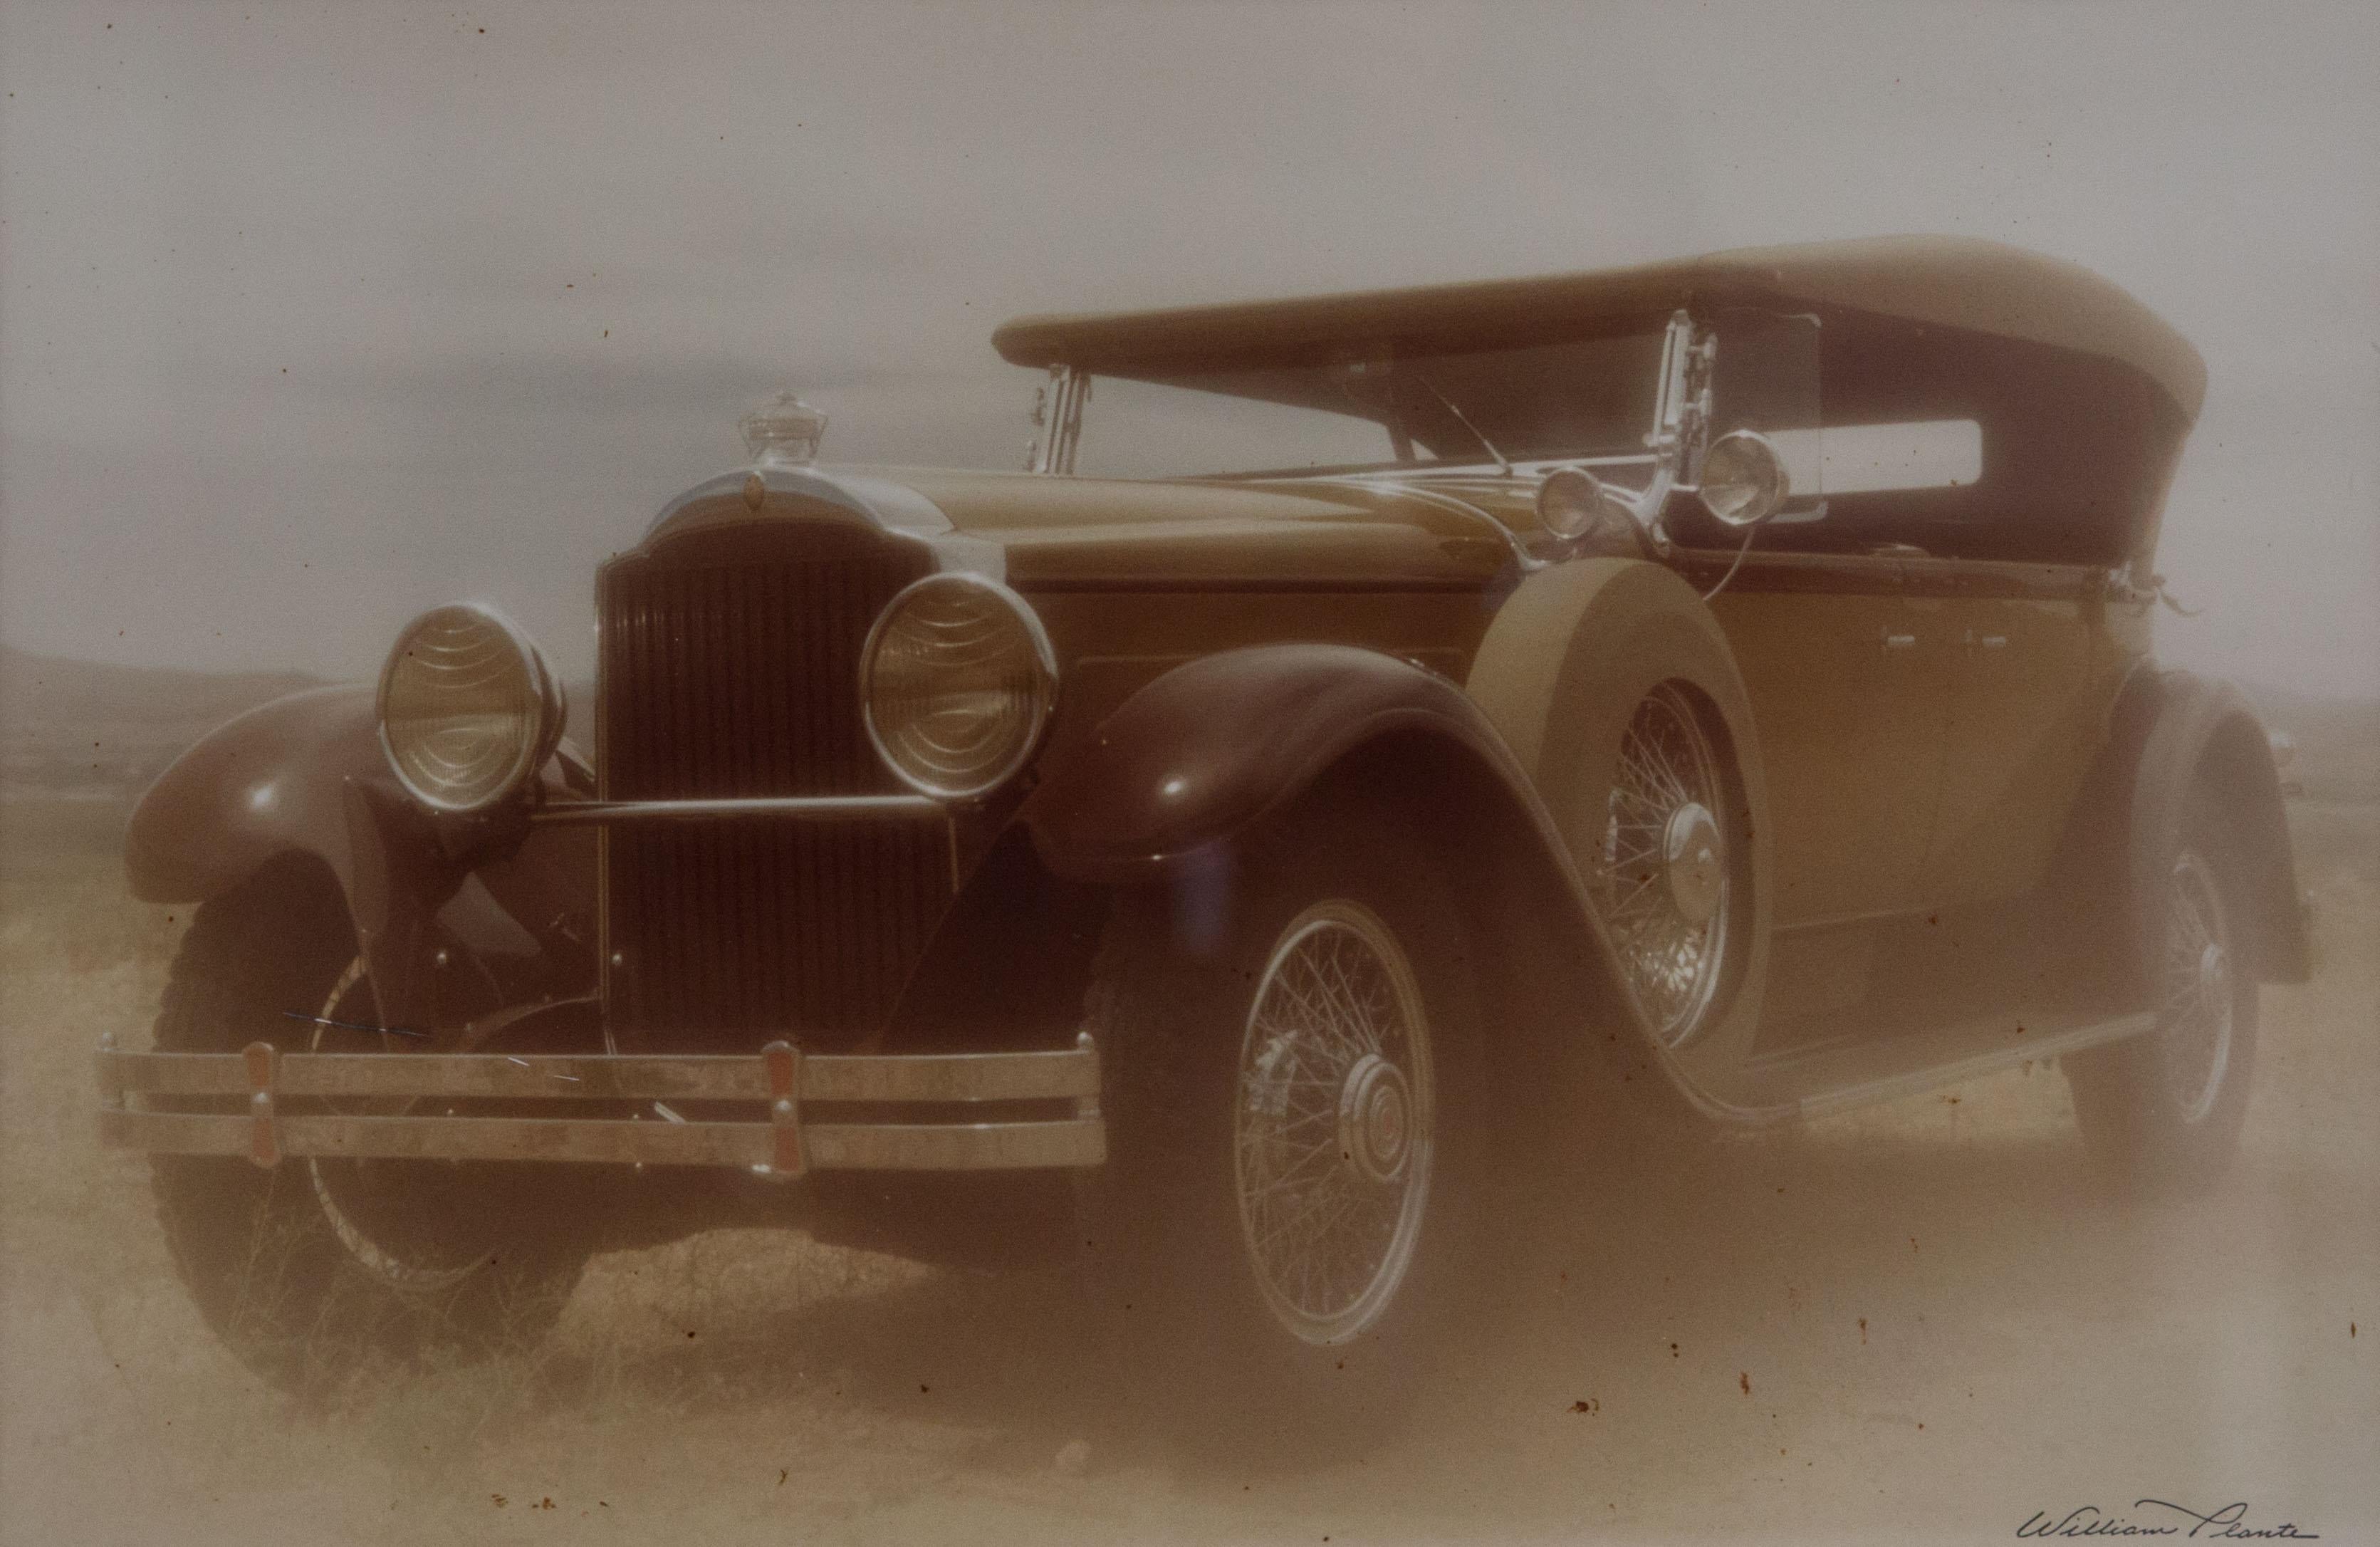 Offered is a signed William Plante original signature large folio vintage sepia toned silver print of a 1929 Packard Phaeton automobile. The work measures 24” x 32” Packard's started at $2,600, vehicles consistently considered the elite in luxury